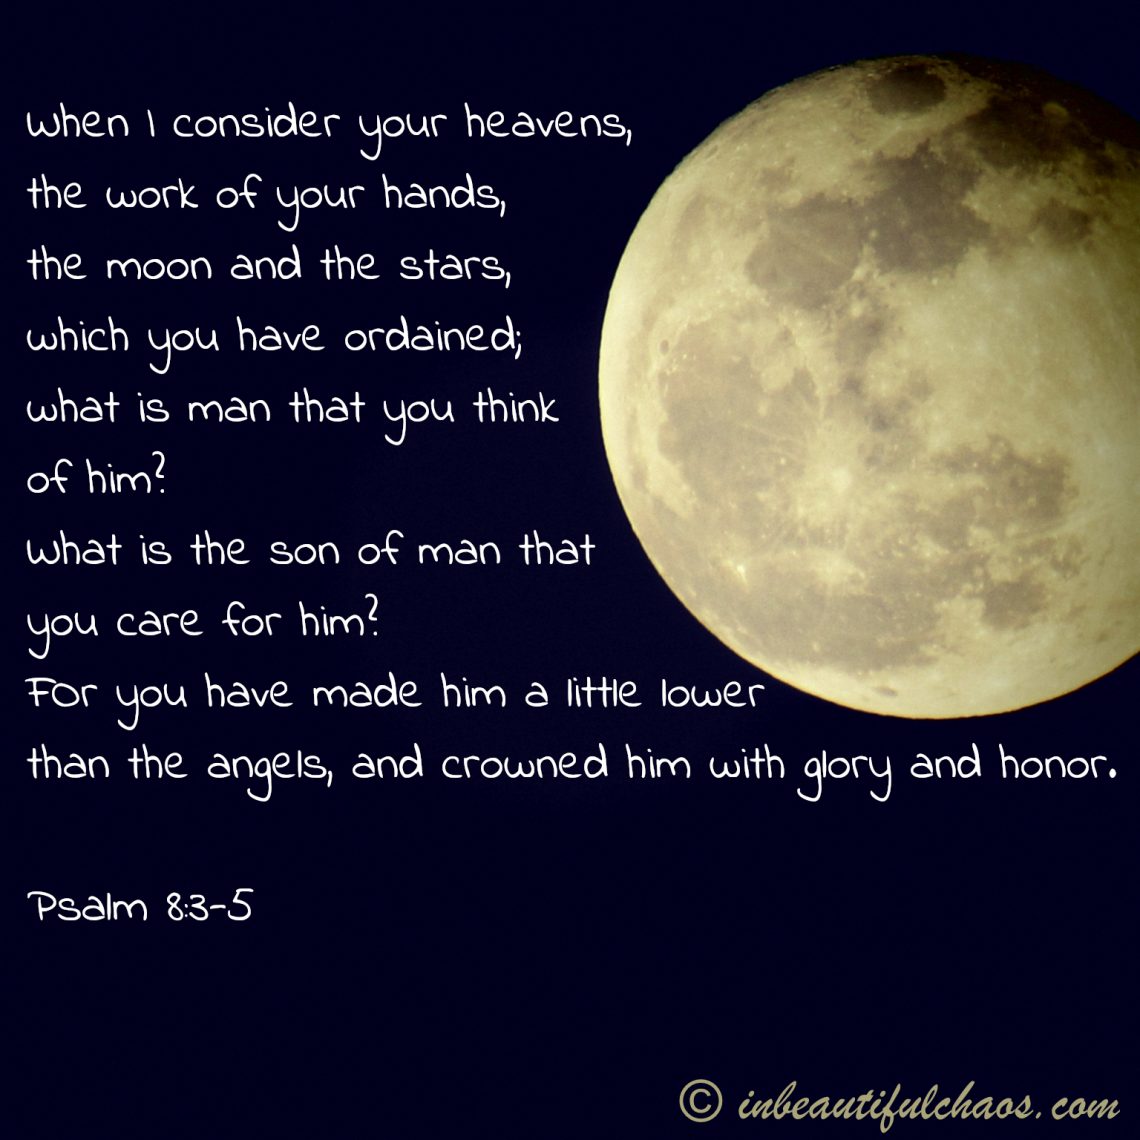 When I Consider Your Heavens...